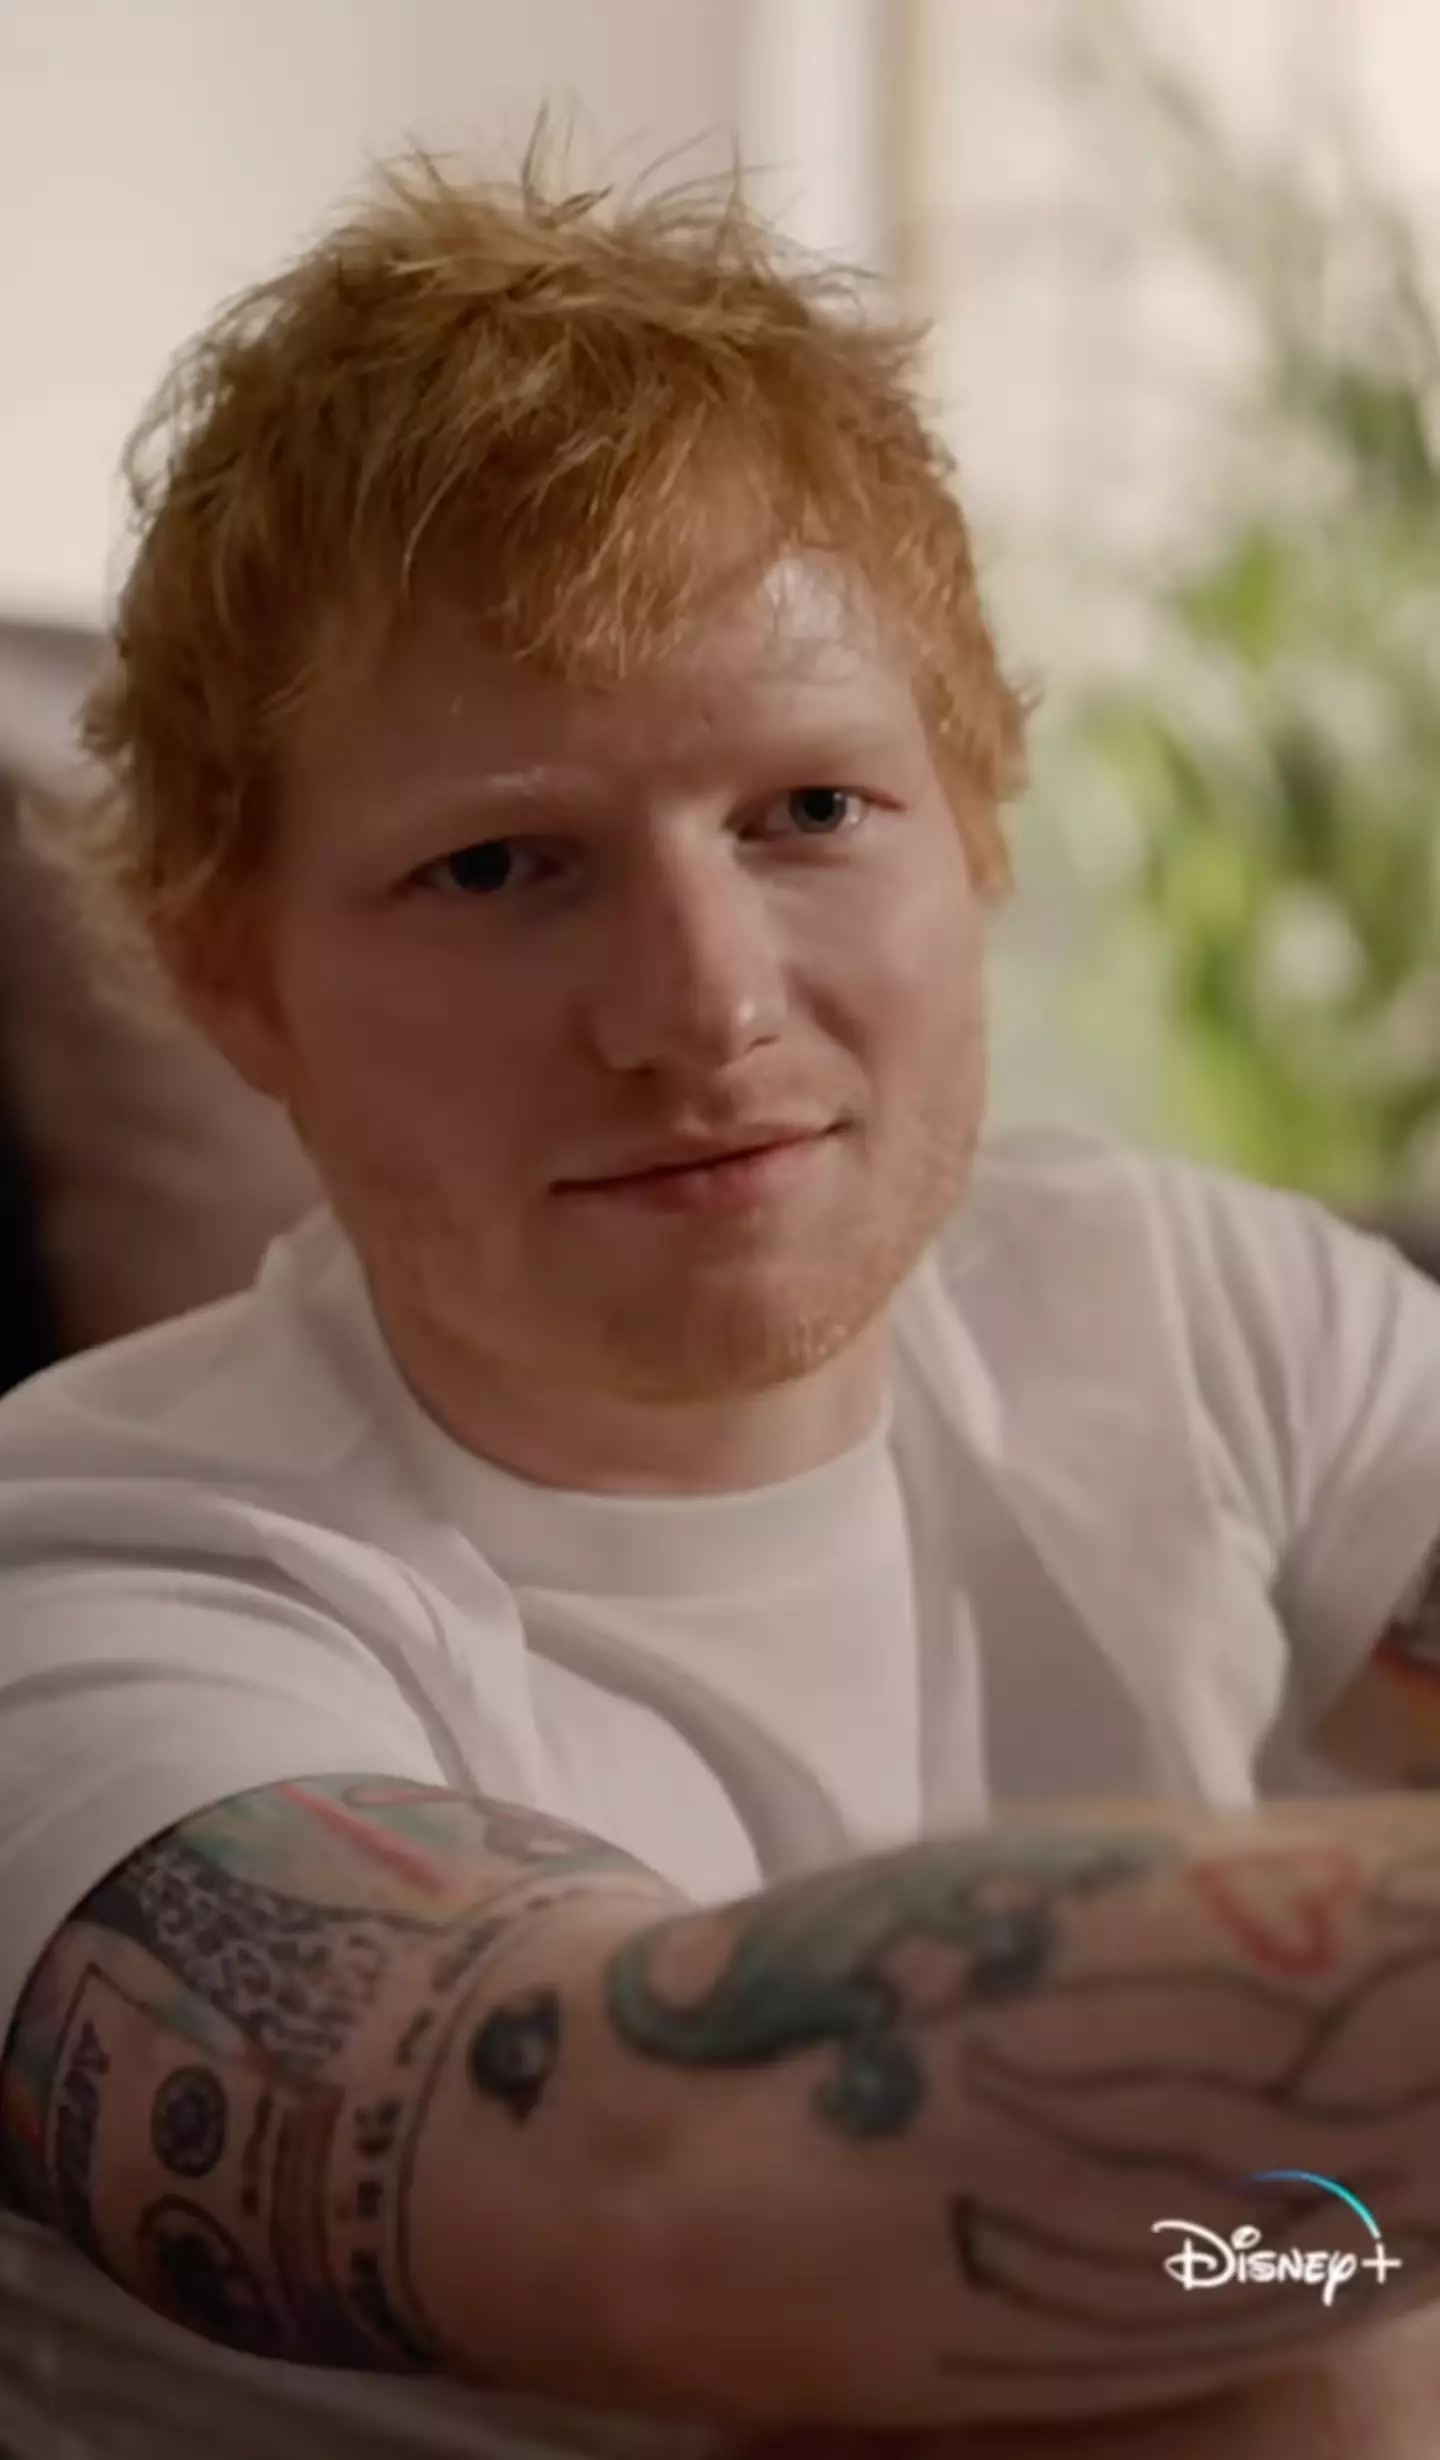 Ed Sheeran eased off the drinking to be there for his children.